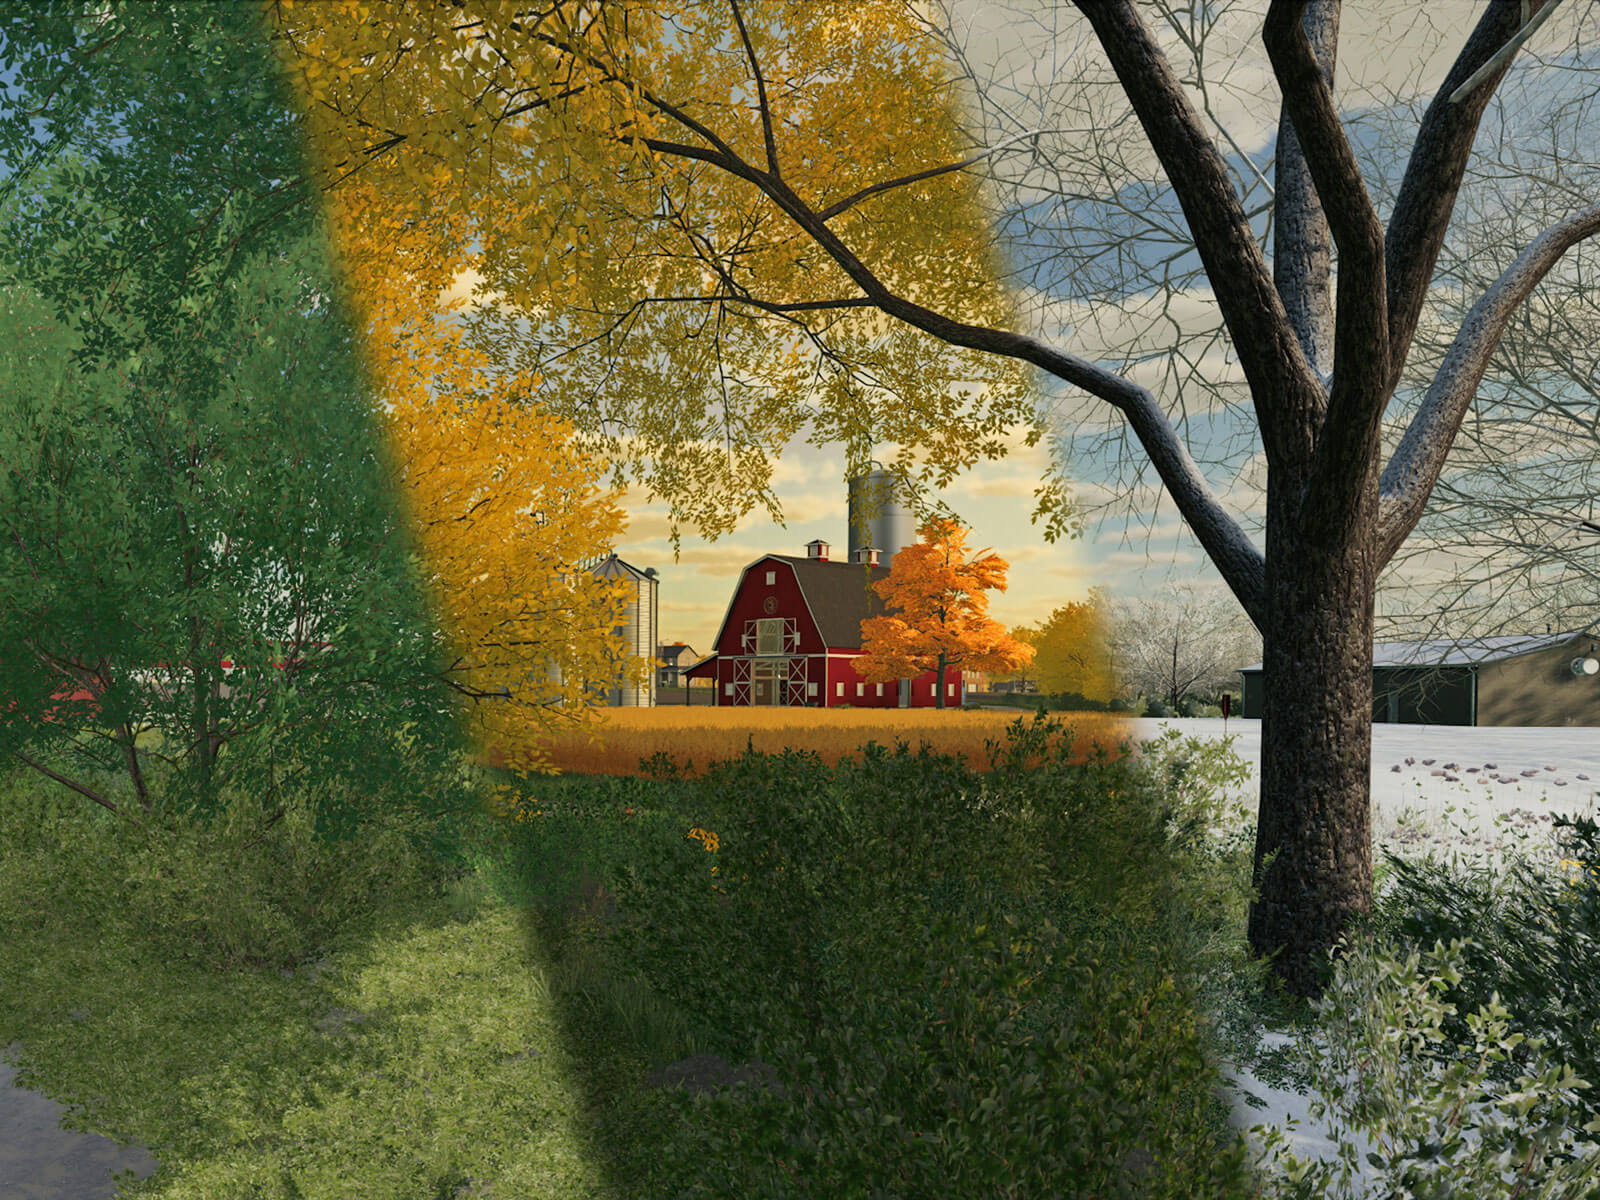 Four separate in-game panels showing different seasons of nature inside Farming Simulator 22